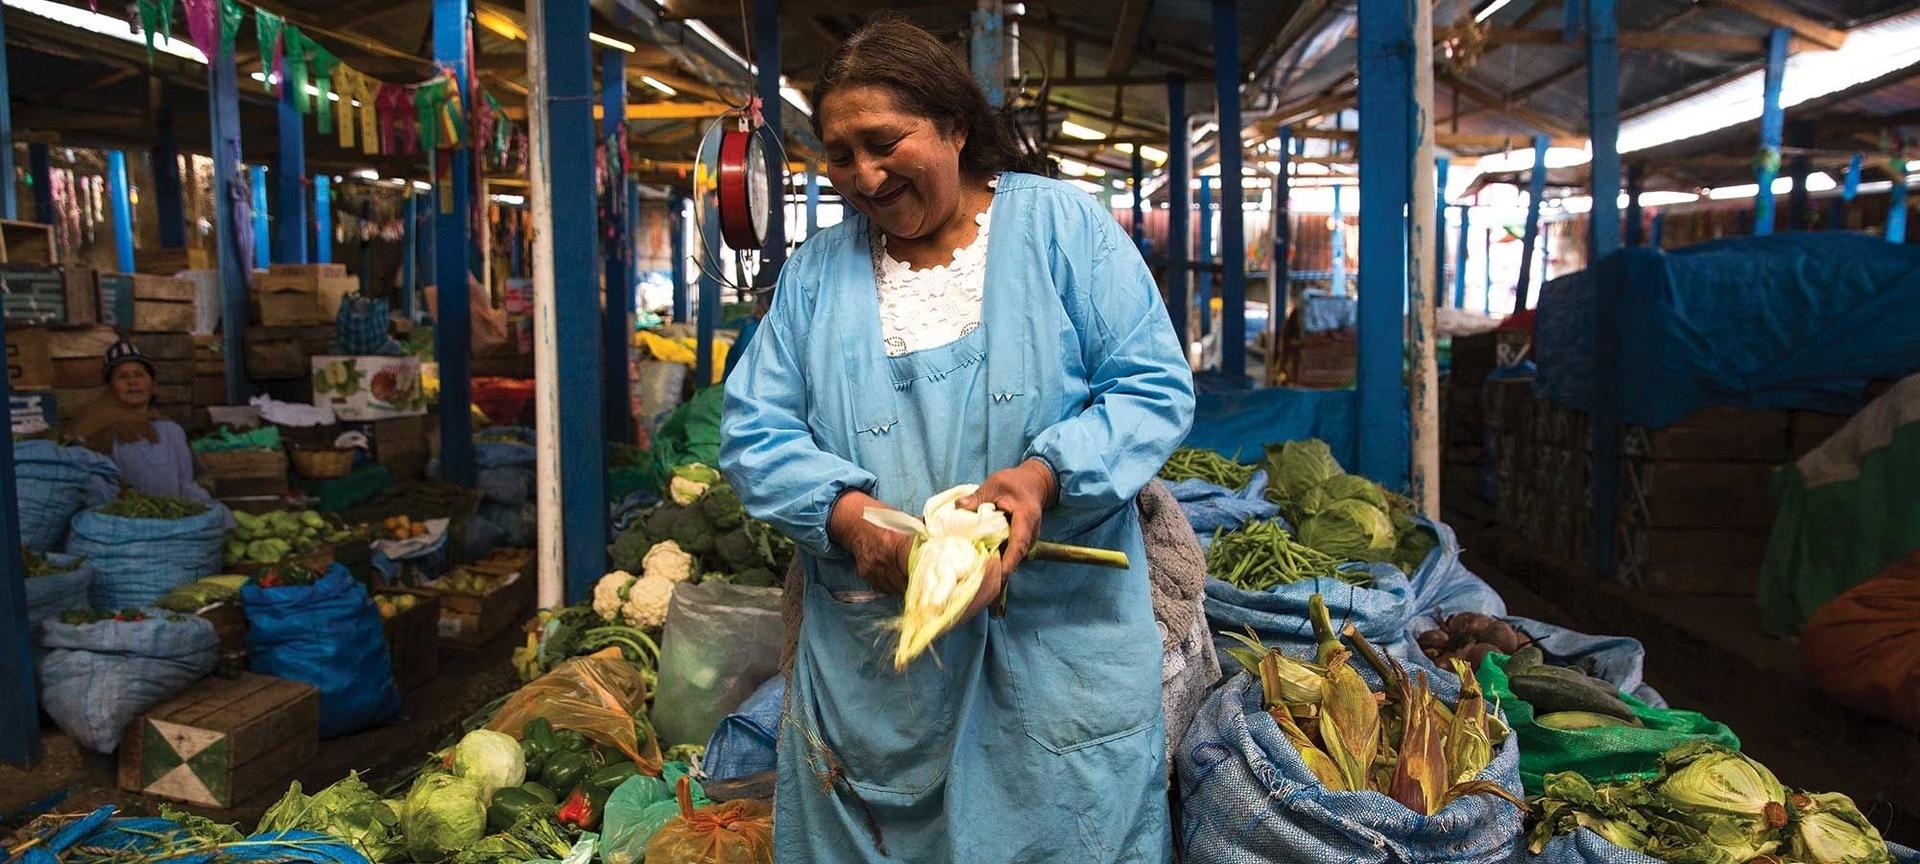 A woman wearing blue stands at her stall in the market